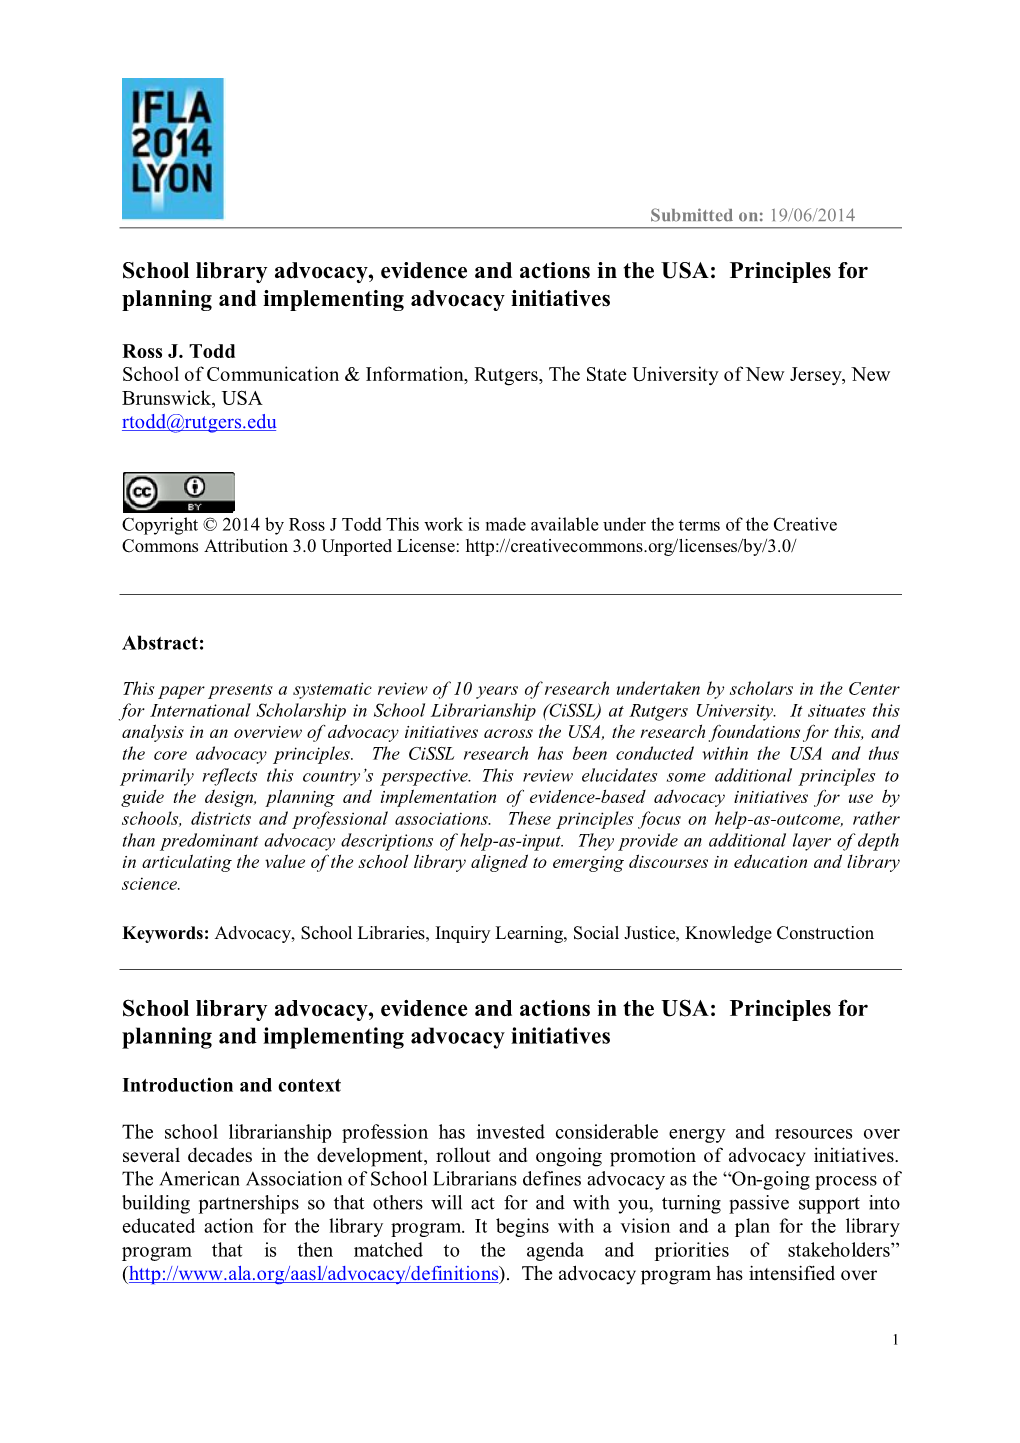 School Library Advocacy, Evidence and Actions in the USA: Principles for Planning and Implementing Advocacy Initiatives